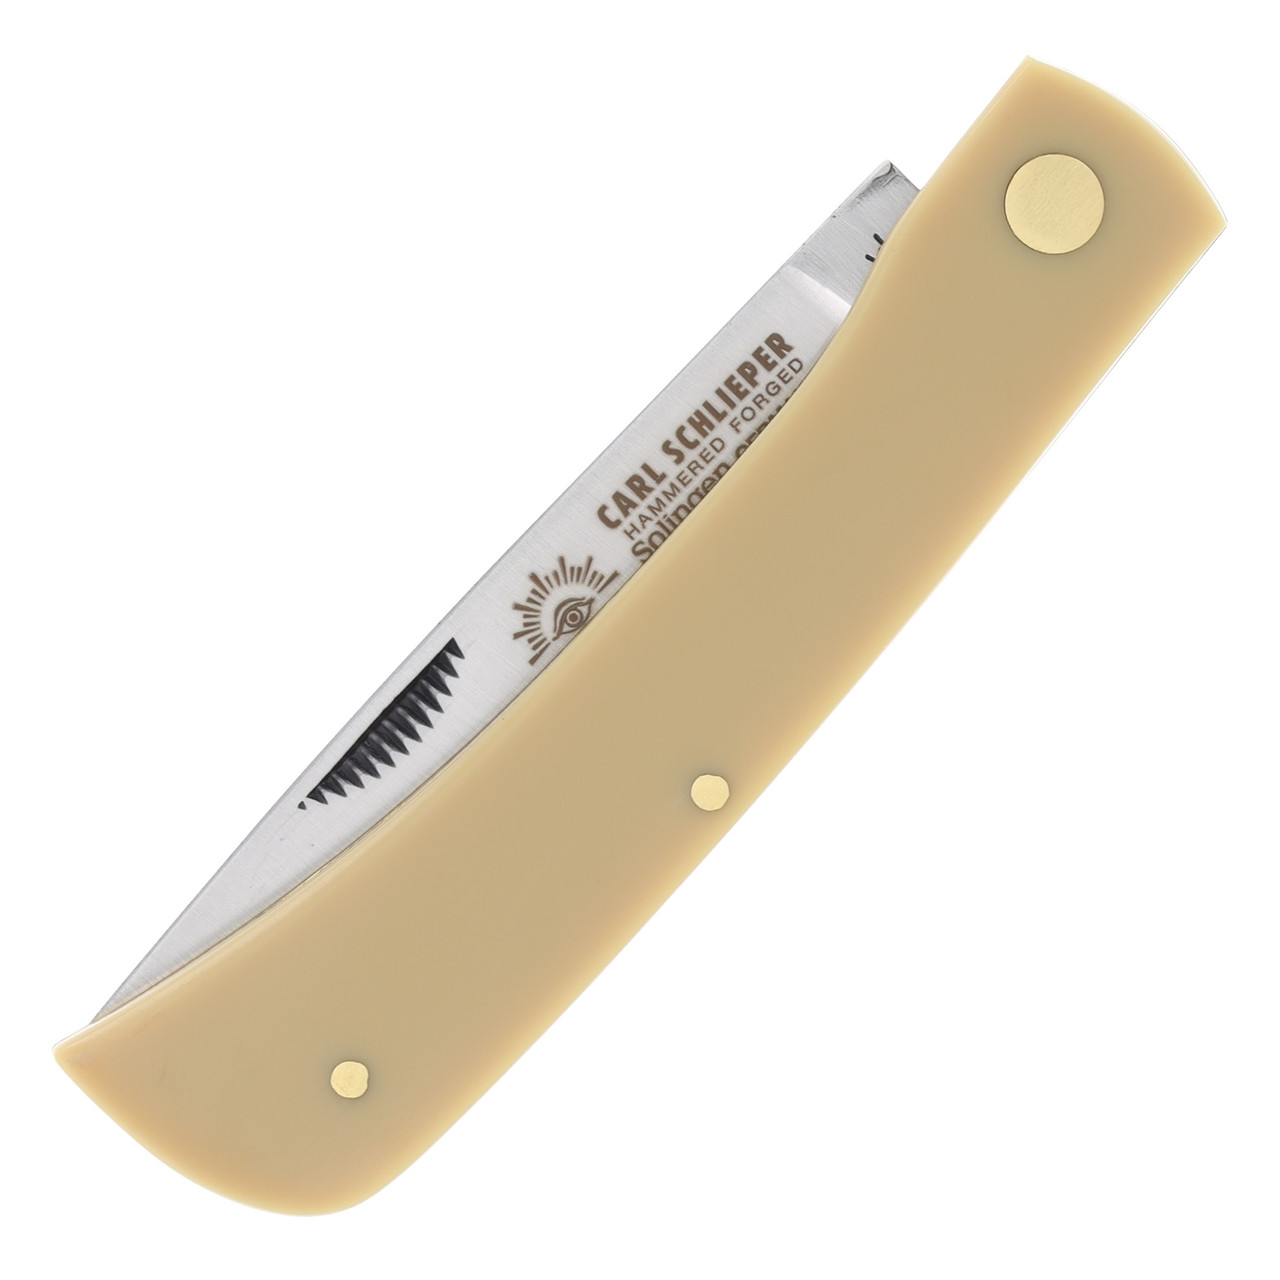 Eye Brand Yellow Composition Clodbuster Folding Knife - Smoky Mountain Knife  Works